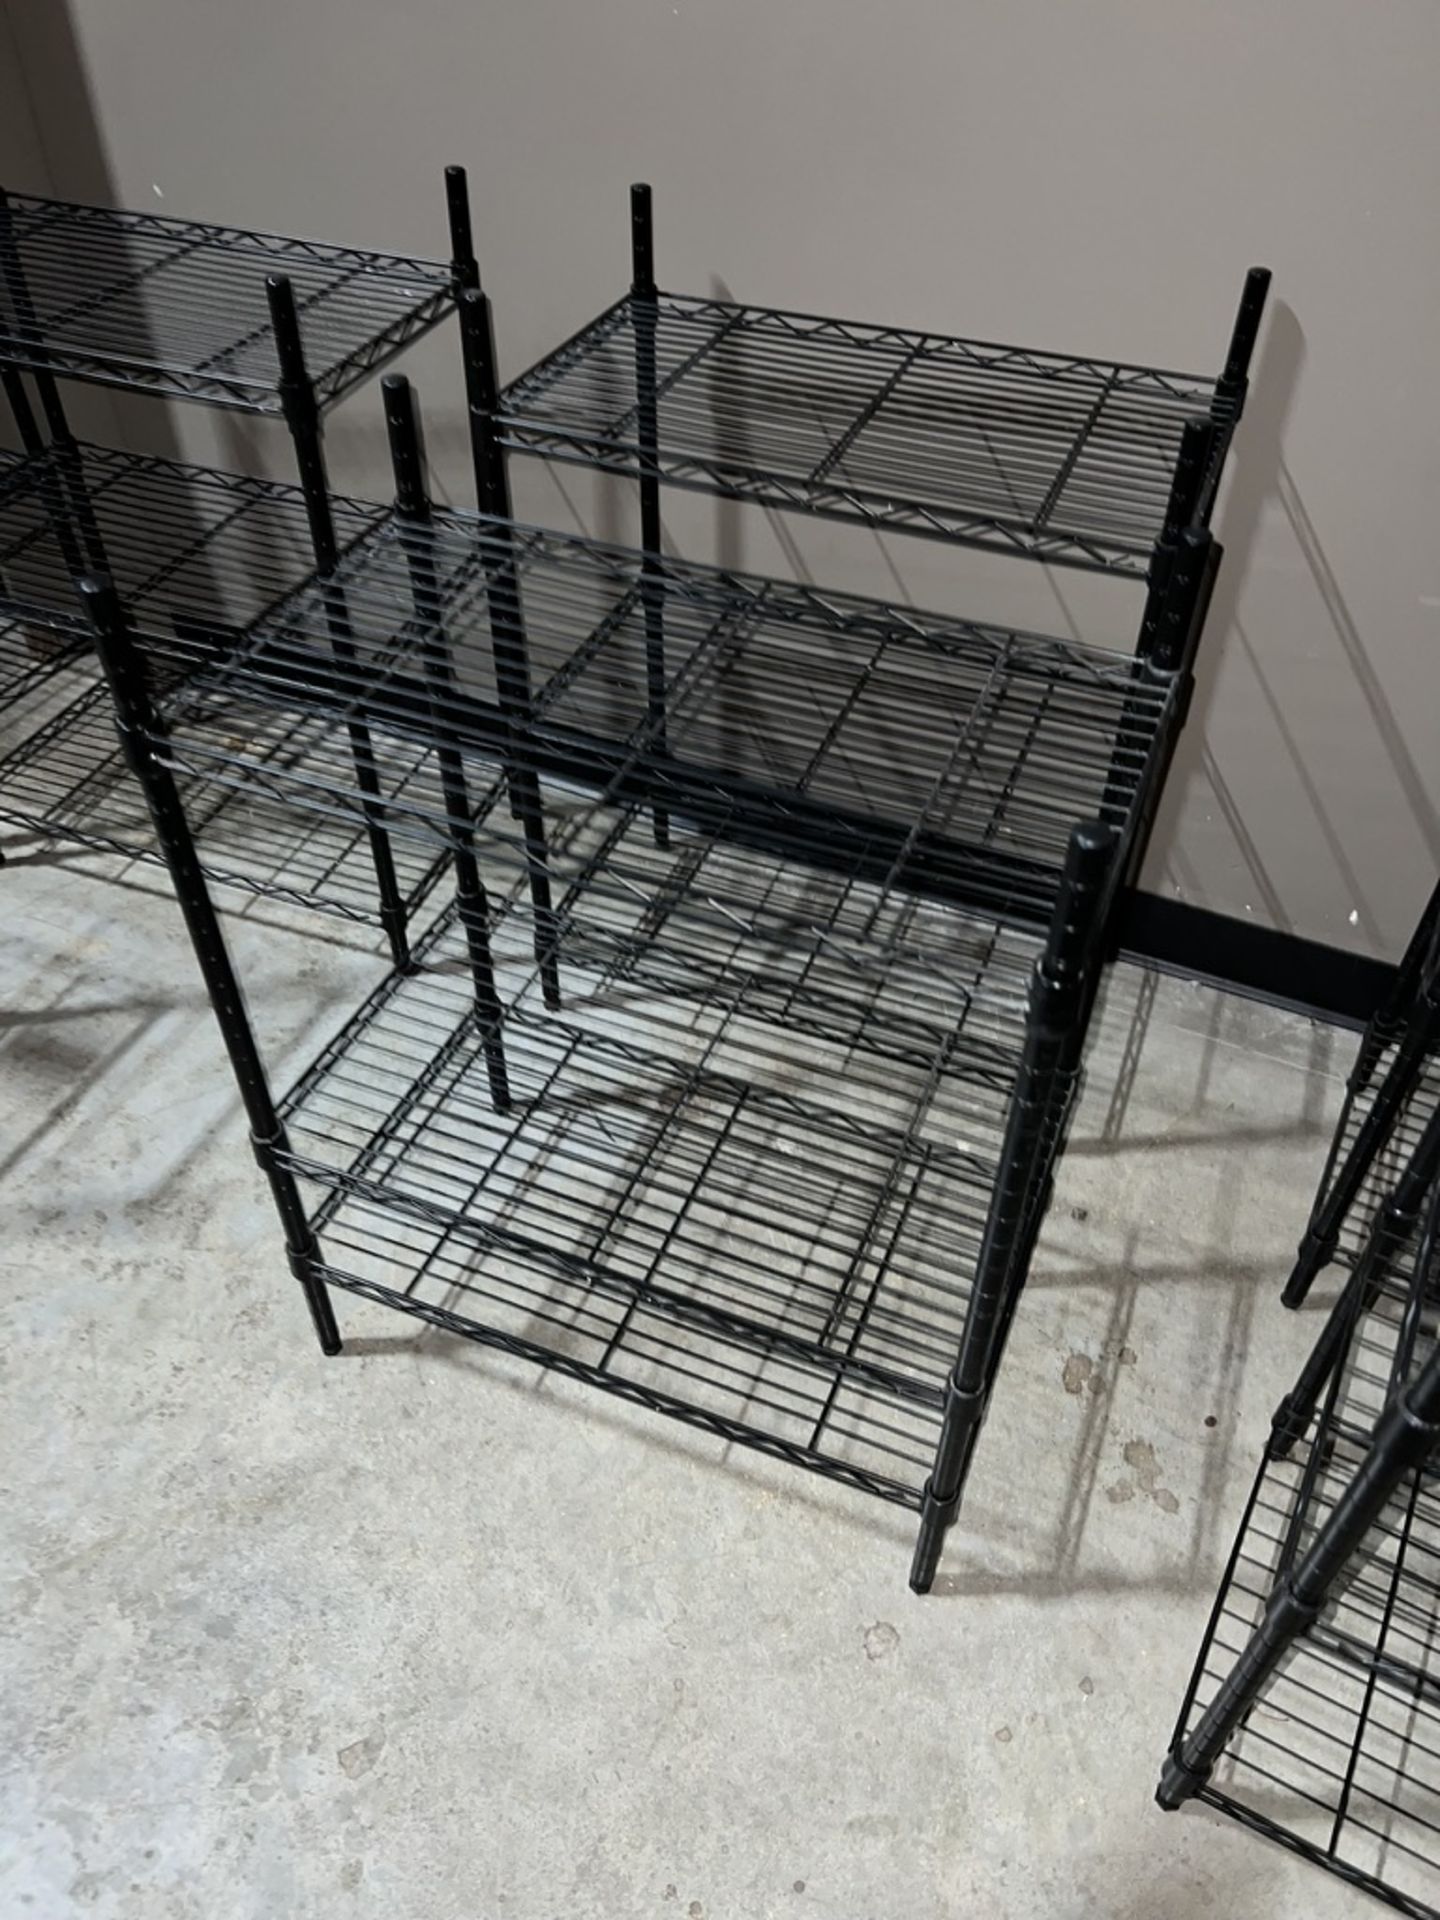 LOT OF: (2) 3-TIER WIRE SHELVING UNITS APPROXIMTELY 24" WIDE